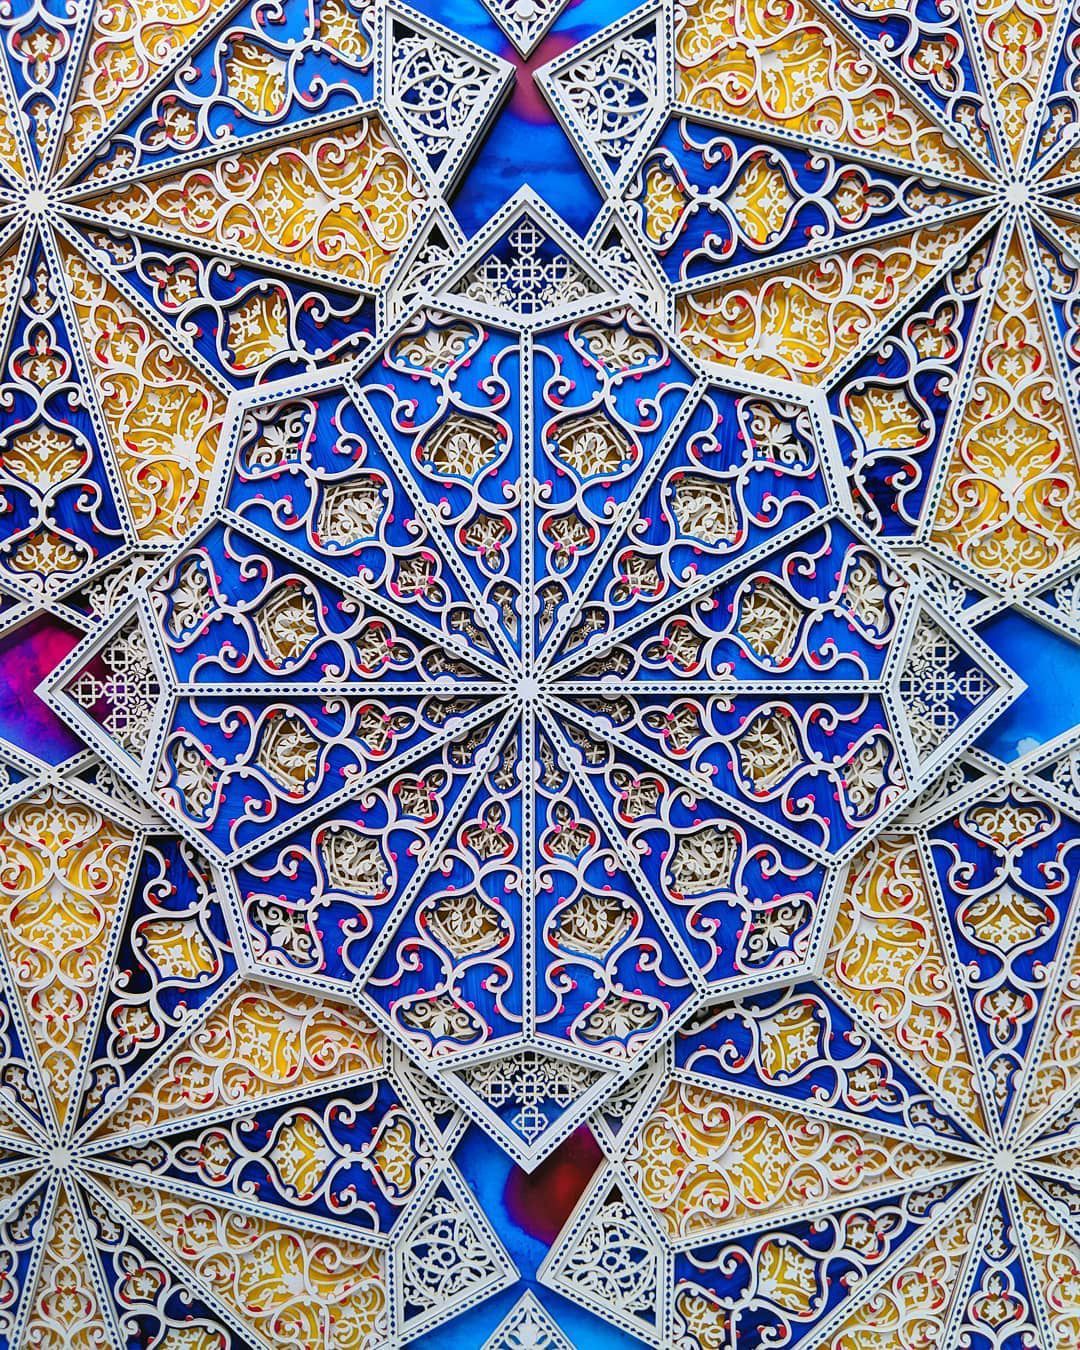 Intricate And Colorful Arabesque Made Of Laser Cut Paper Julia Ibbini 1